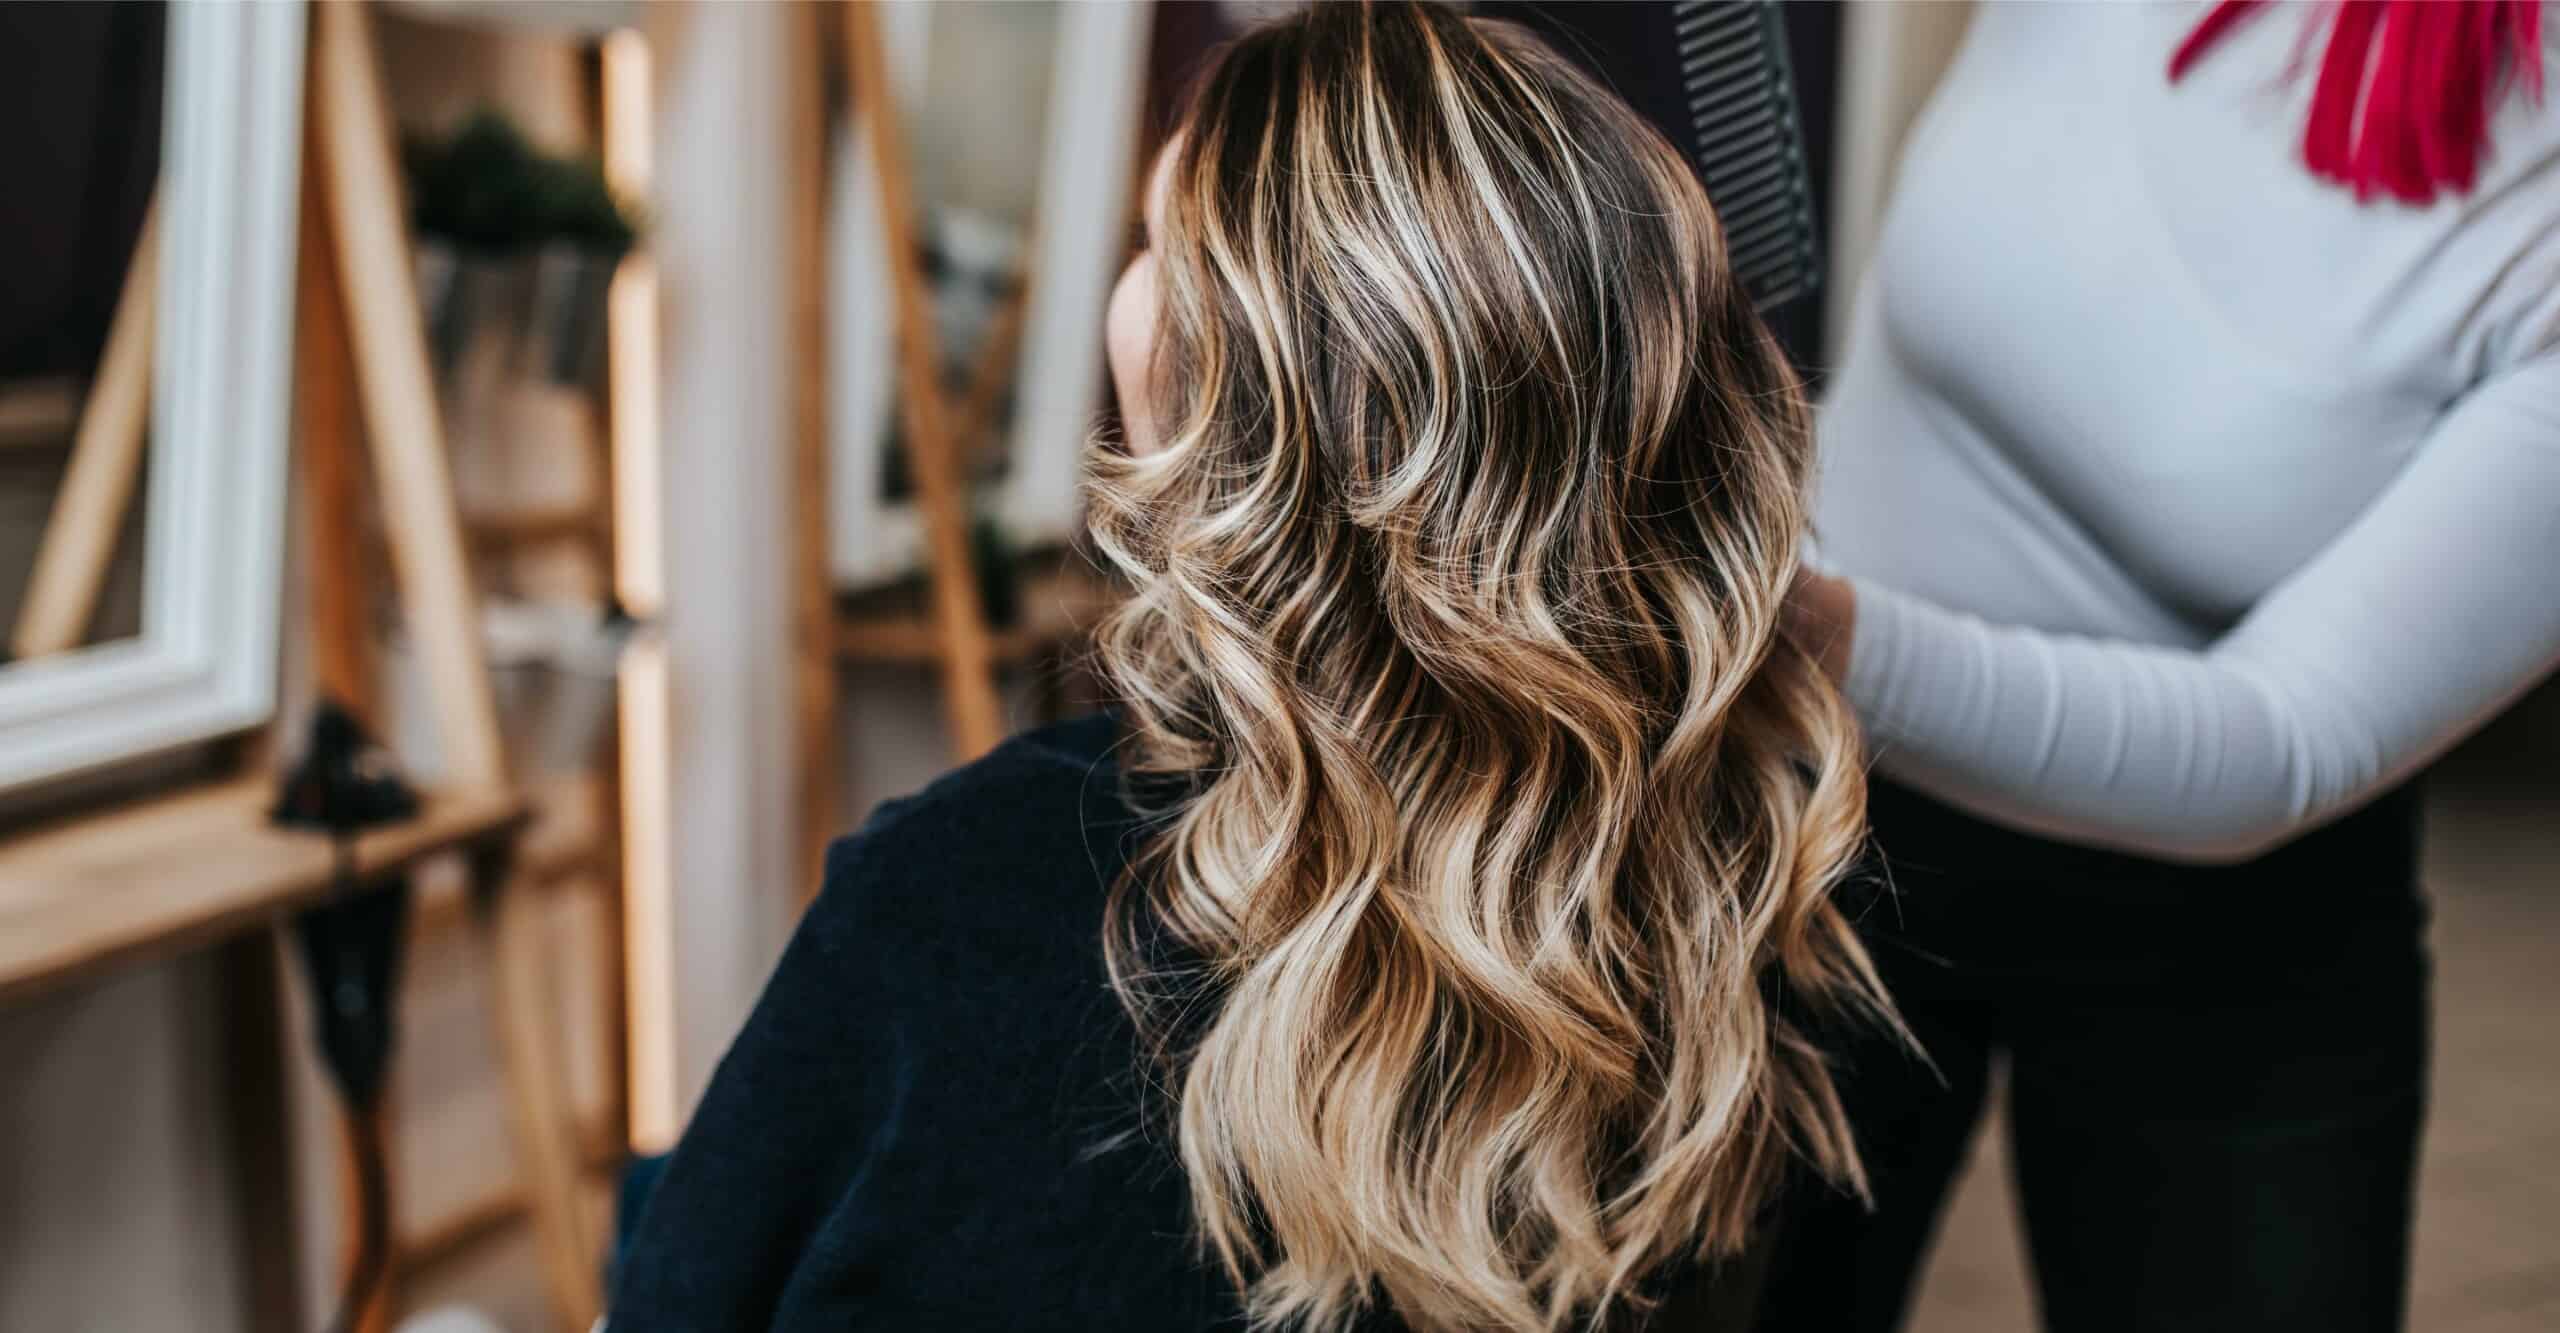 How Much Does Balayage Cost? - StyleSeat